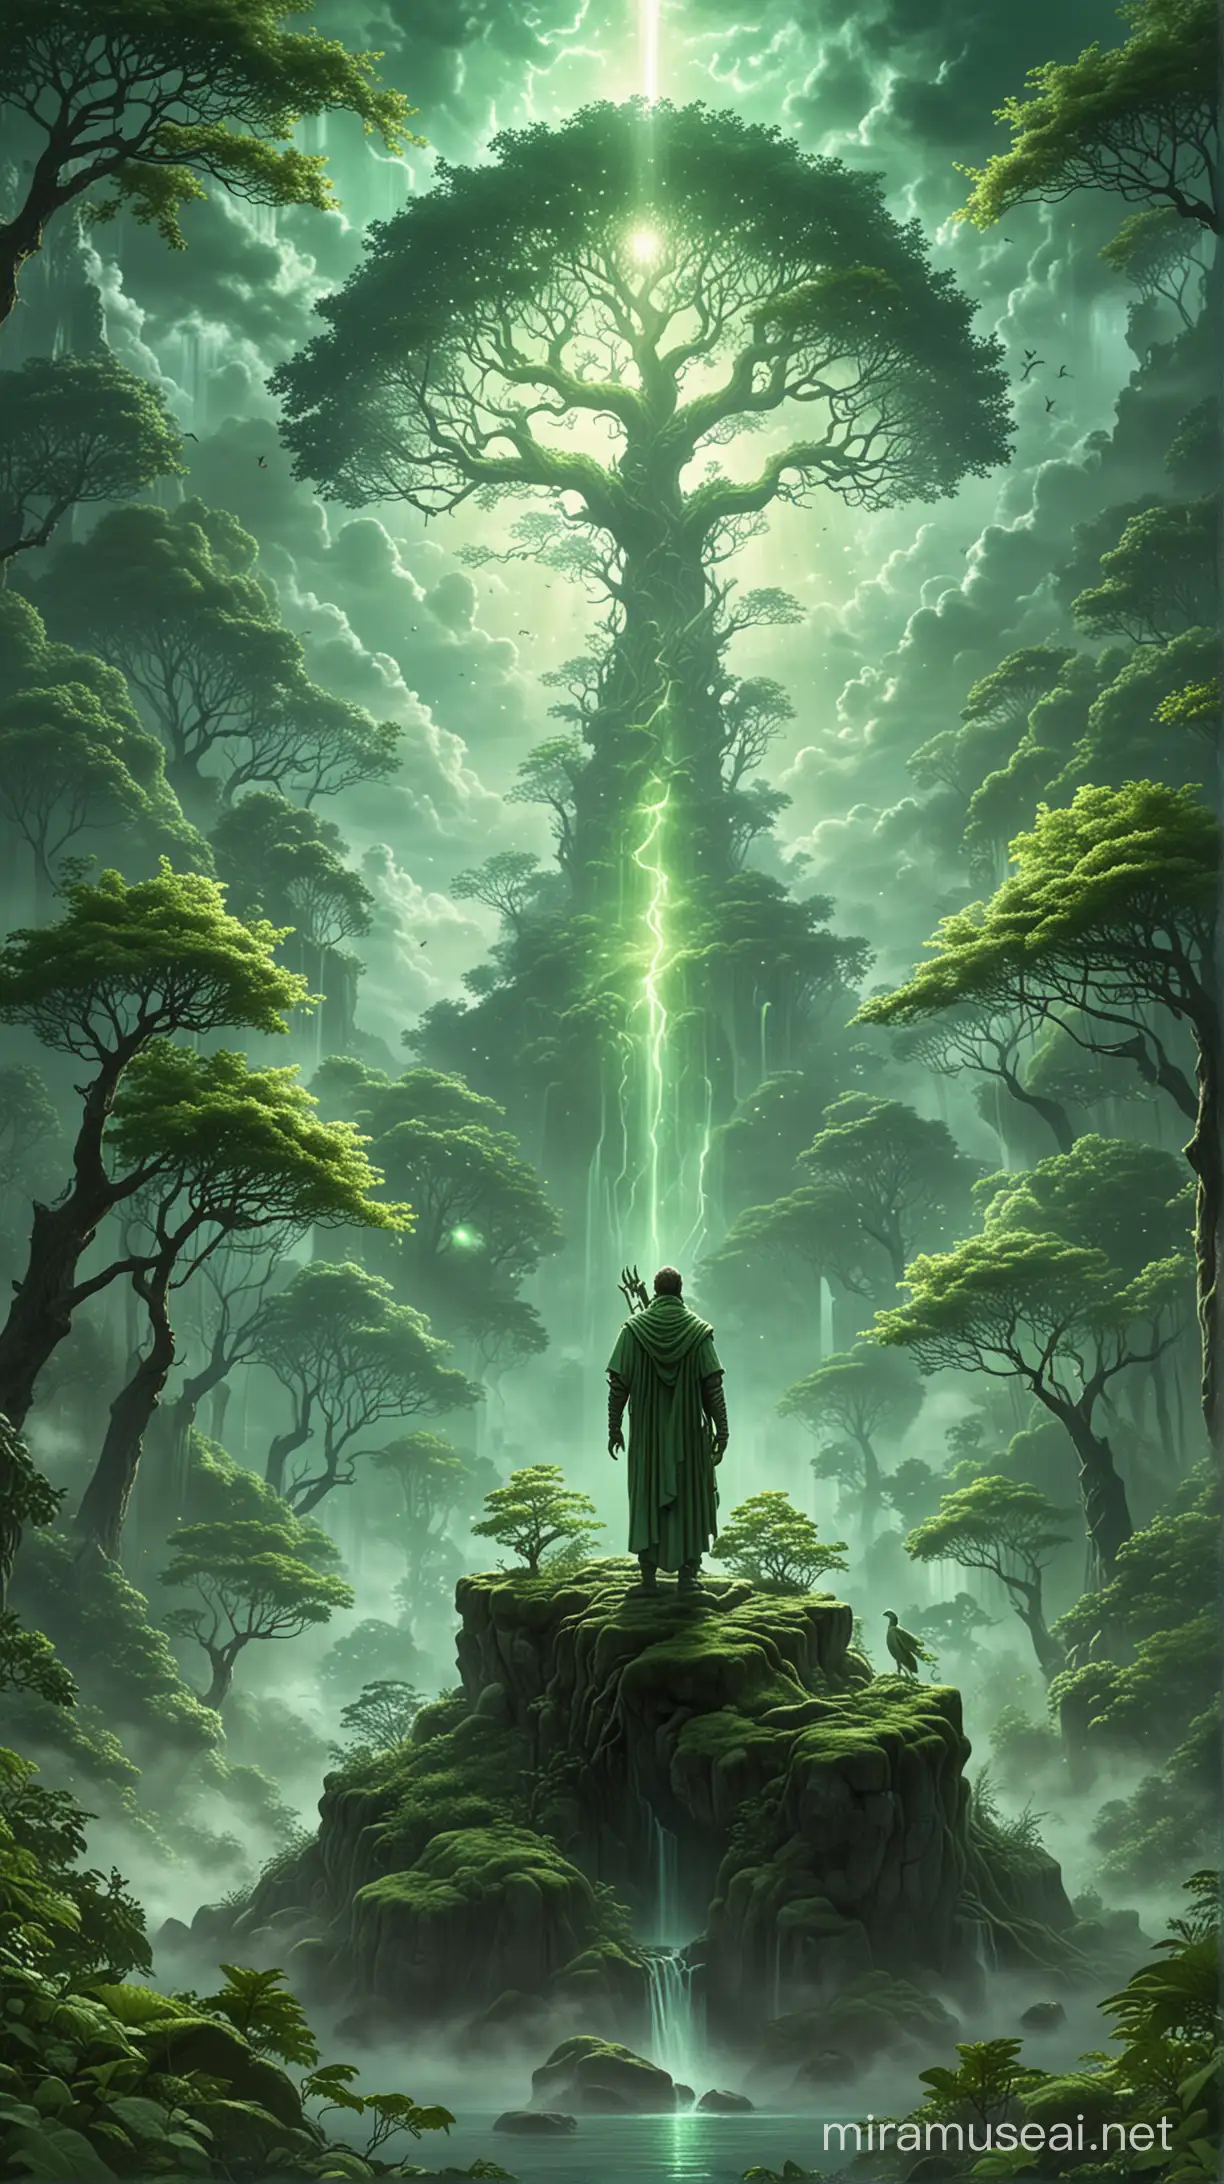 The god of life in a fantasy forest, light green themed, mythical, fantasy sky, light